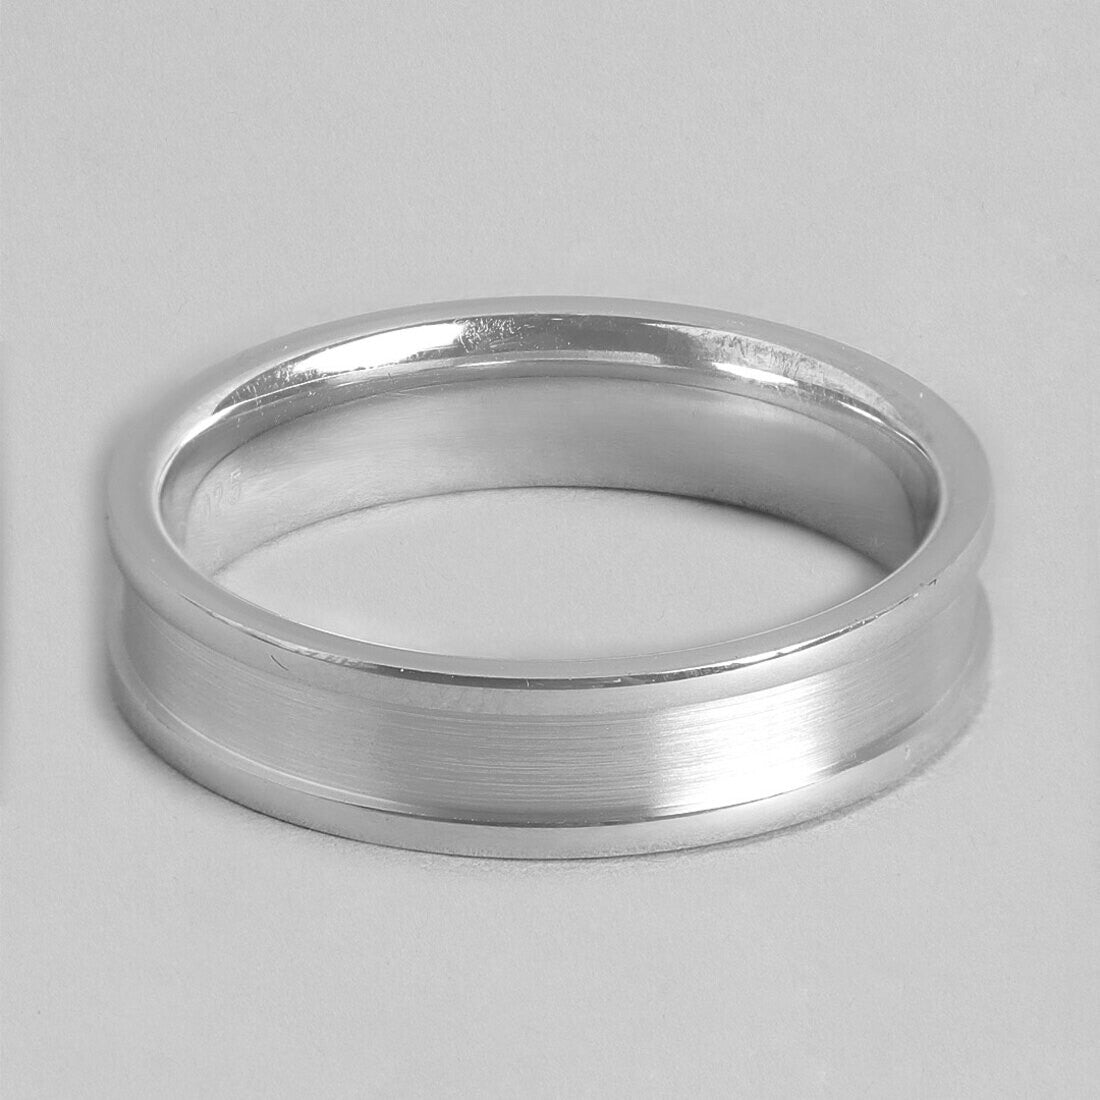 Refined Elegance Timeless Appeal 925 Sterling Silver Ring for Him